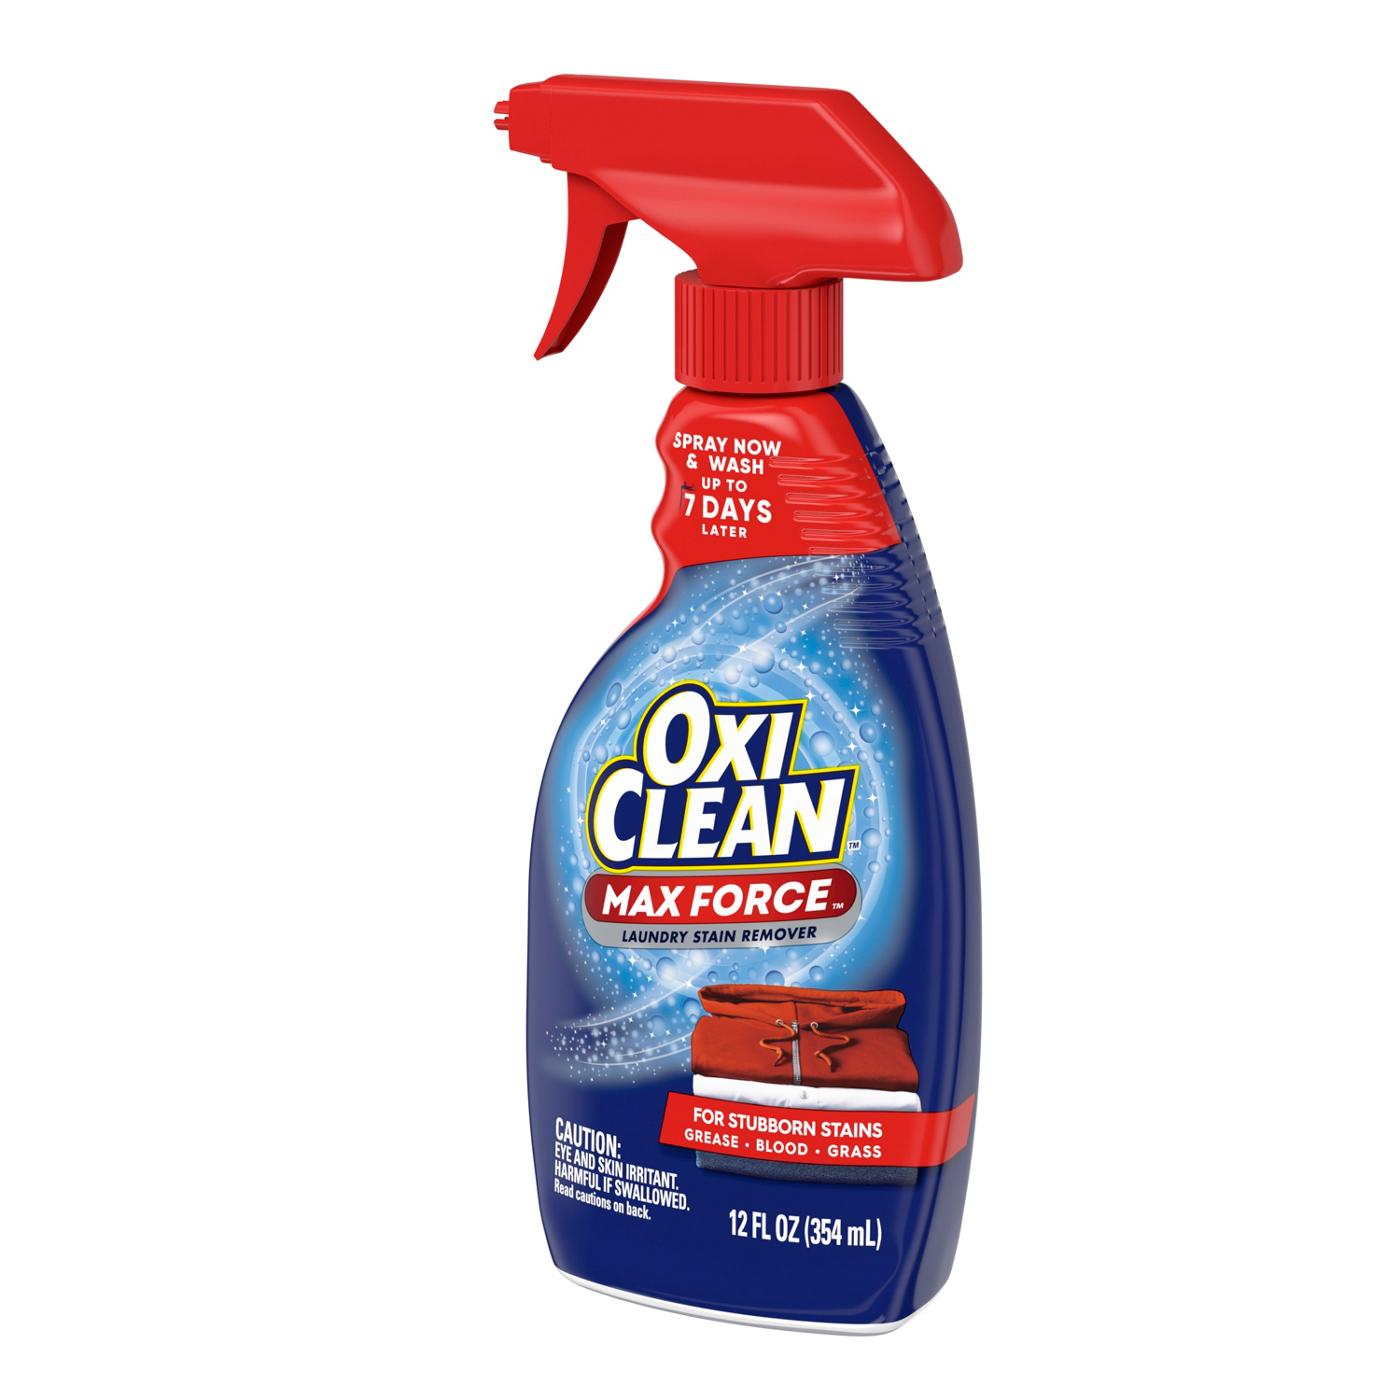 OxiClean Max Force Laundry Stain Remover; image 2 of 4